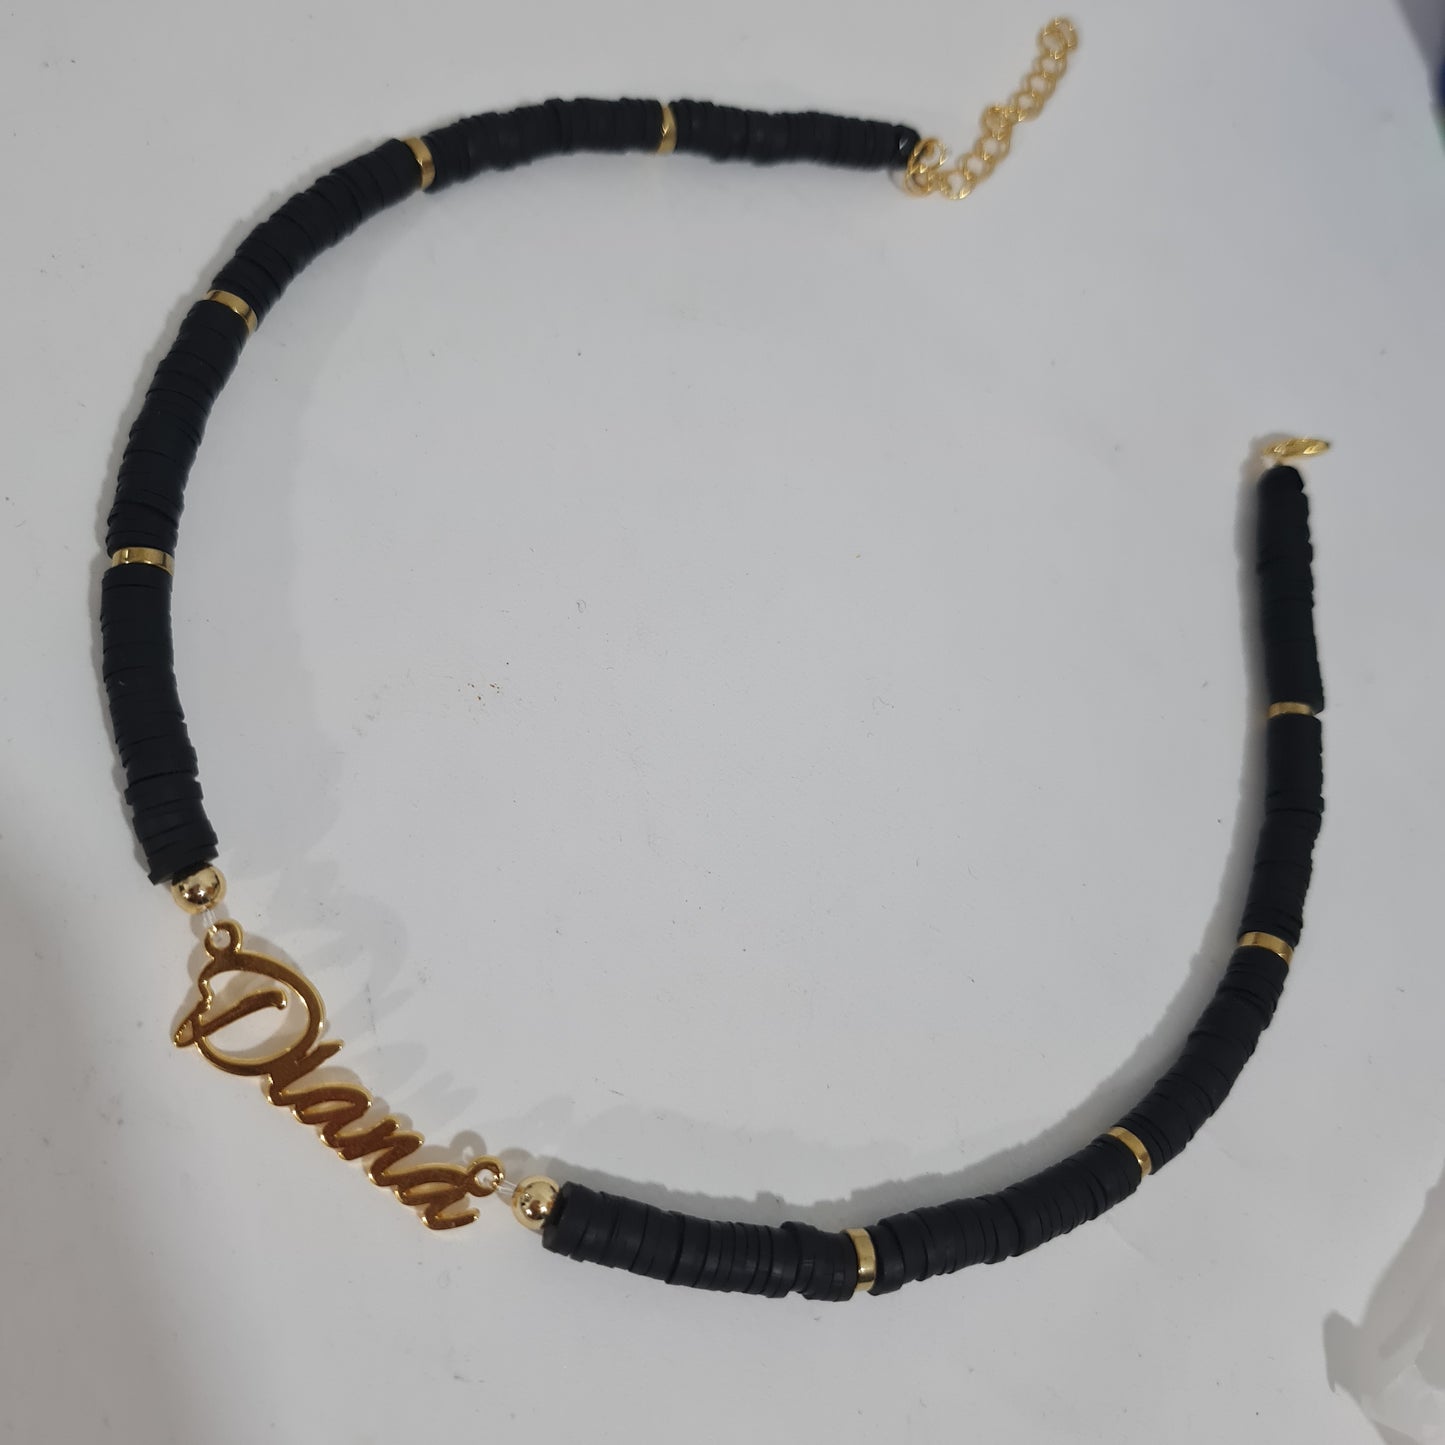 Customized Name necklace